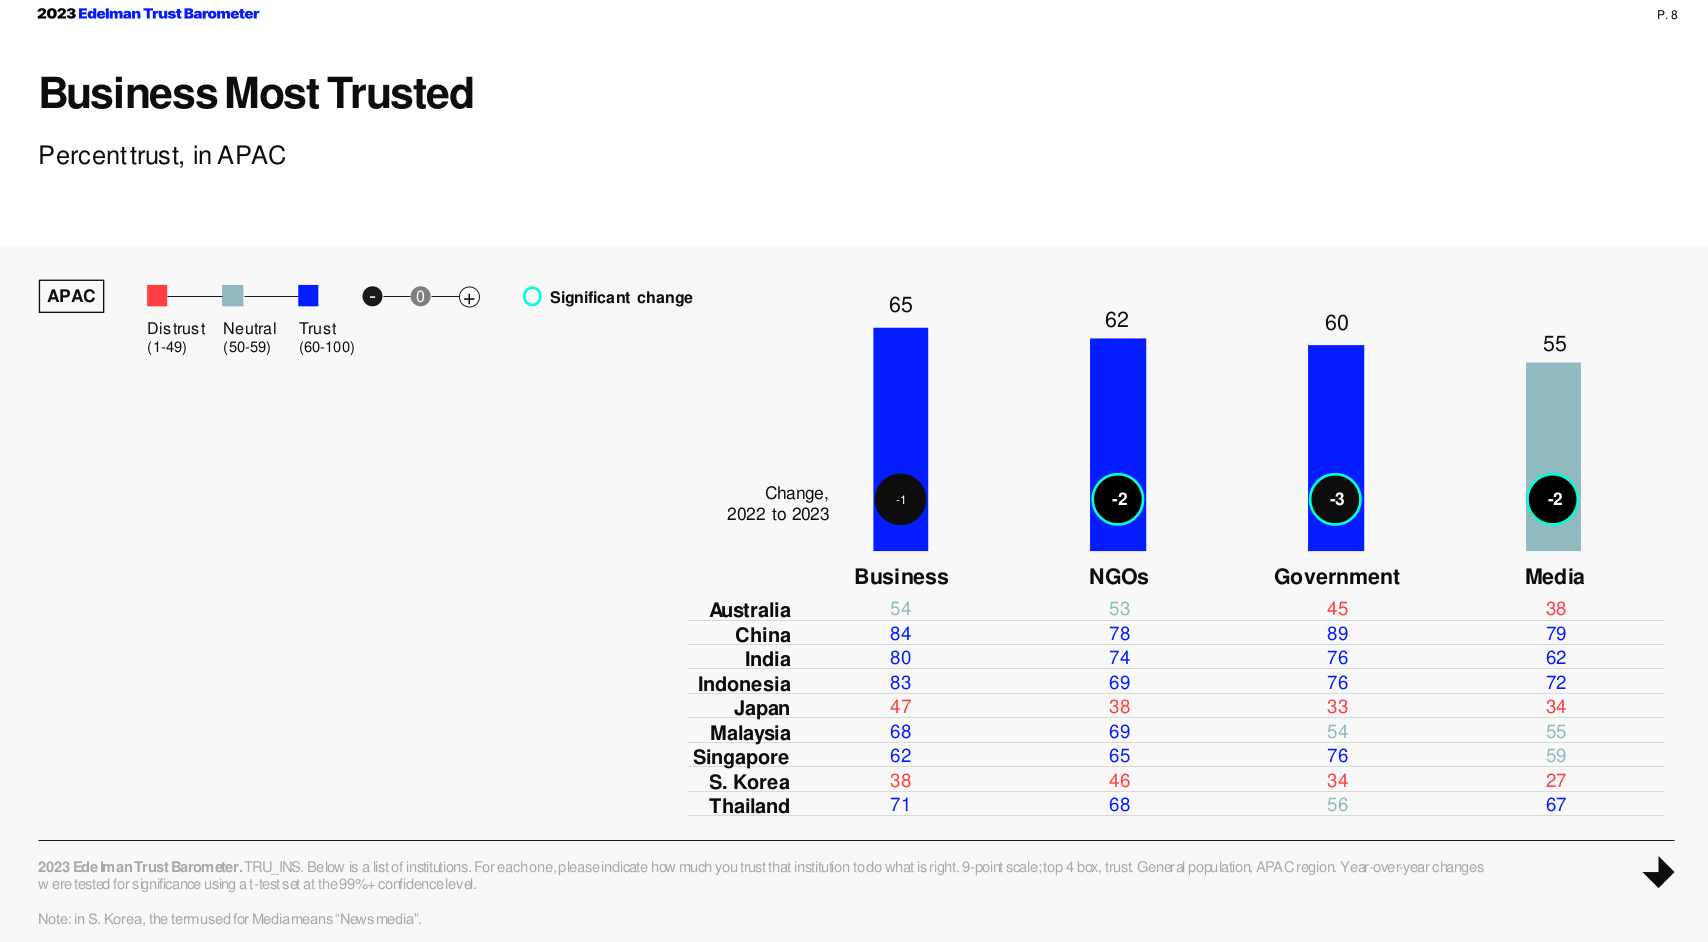 Business most trusted --- except in China and Singapore